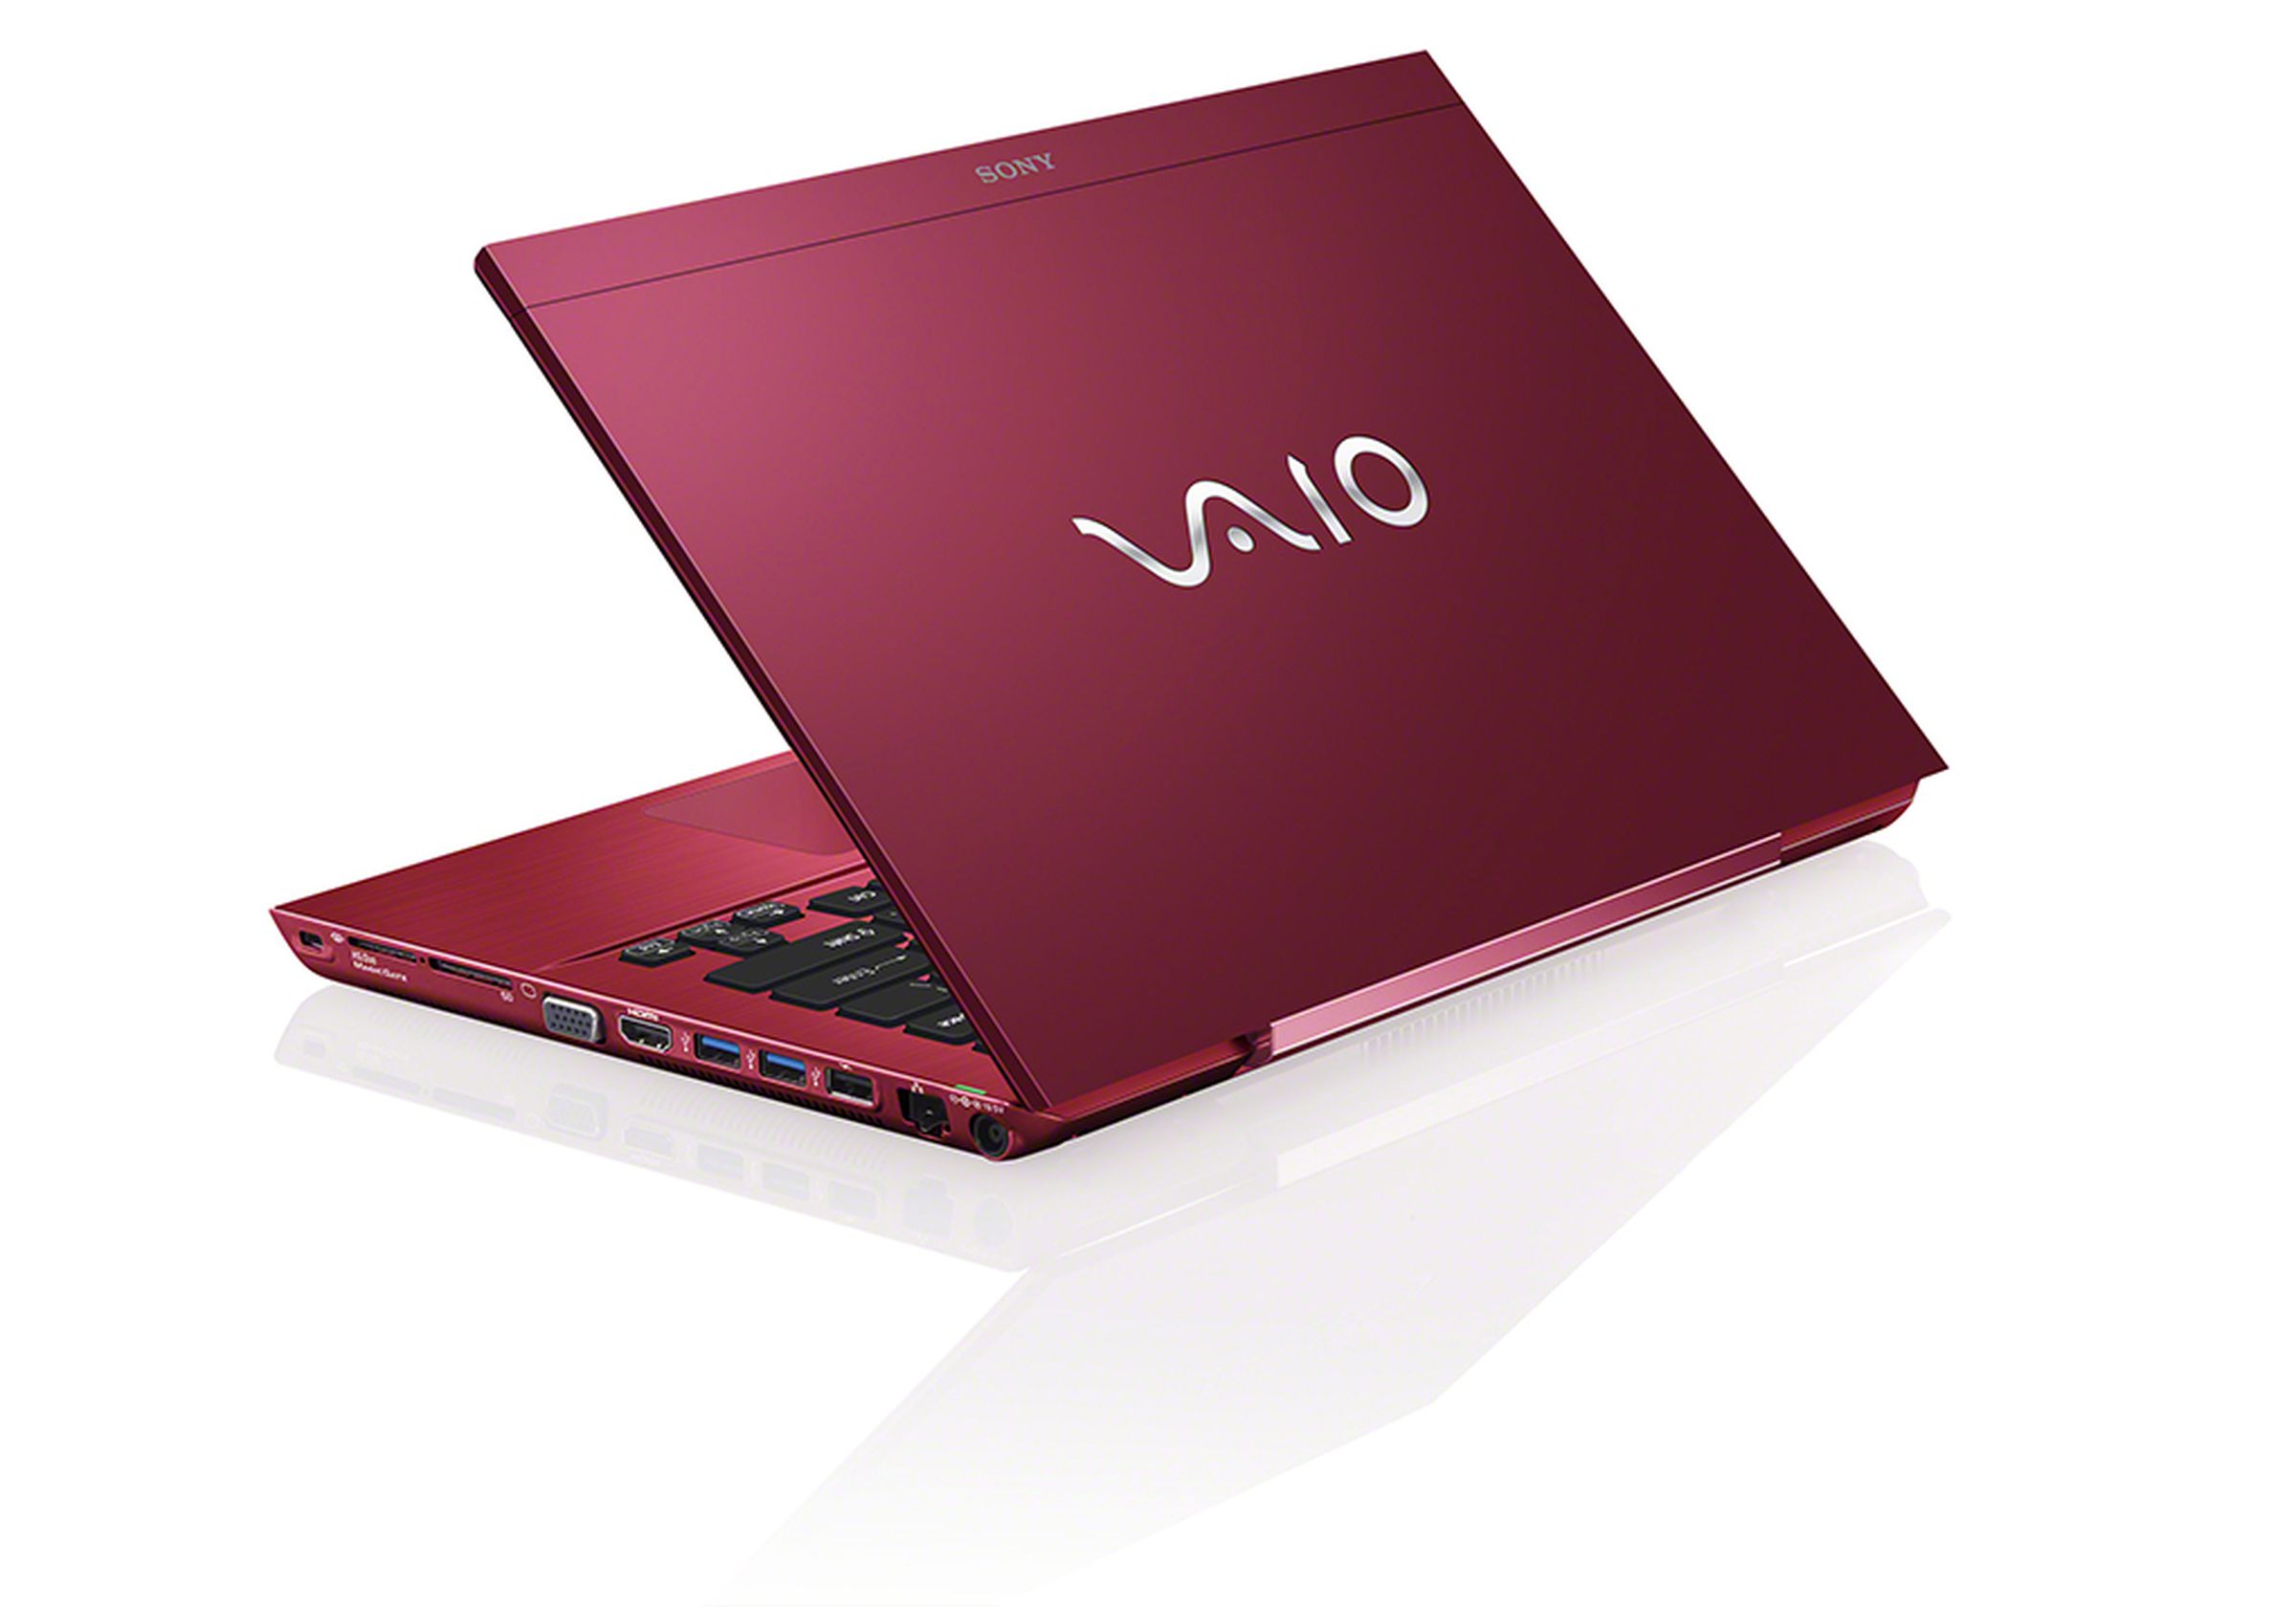 Sony's revamped VAIO lineup for Windows 8 (pictures)